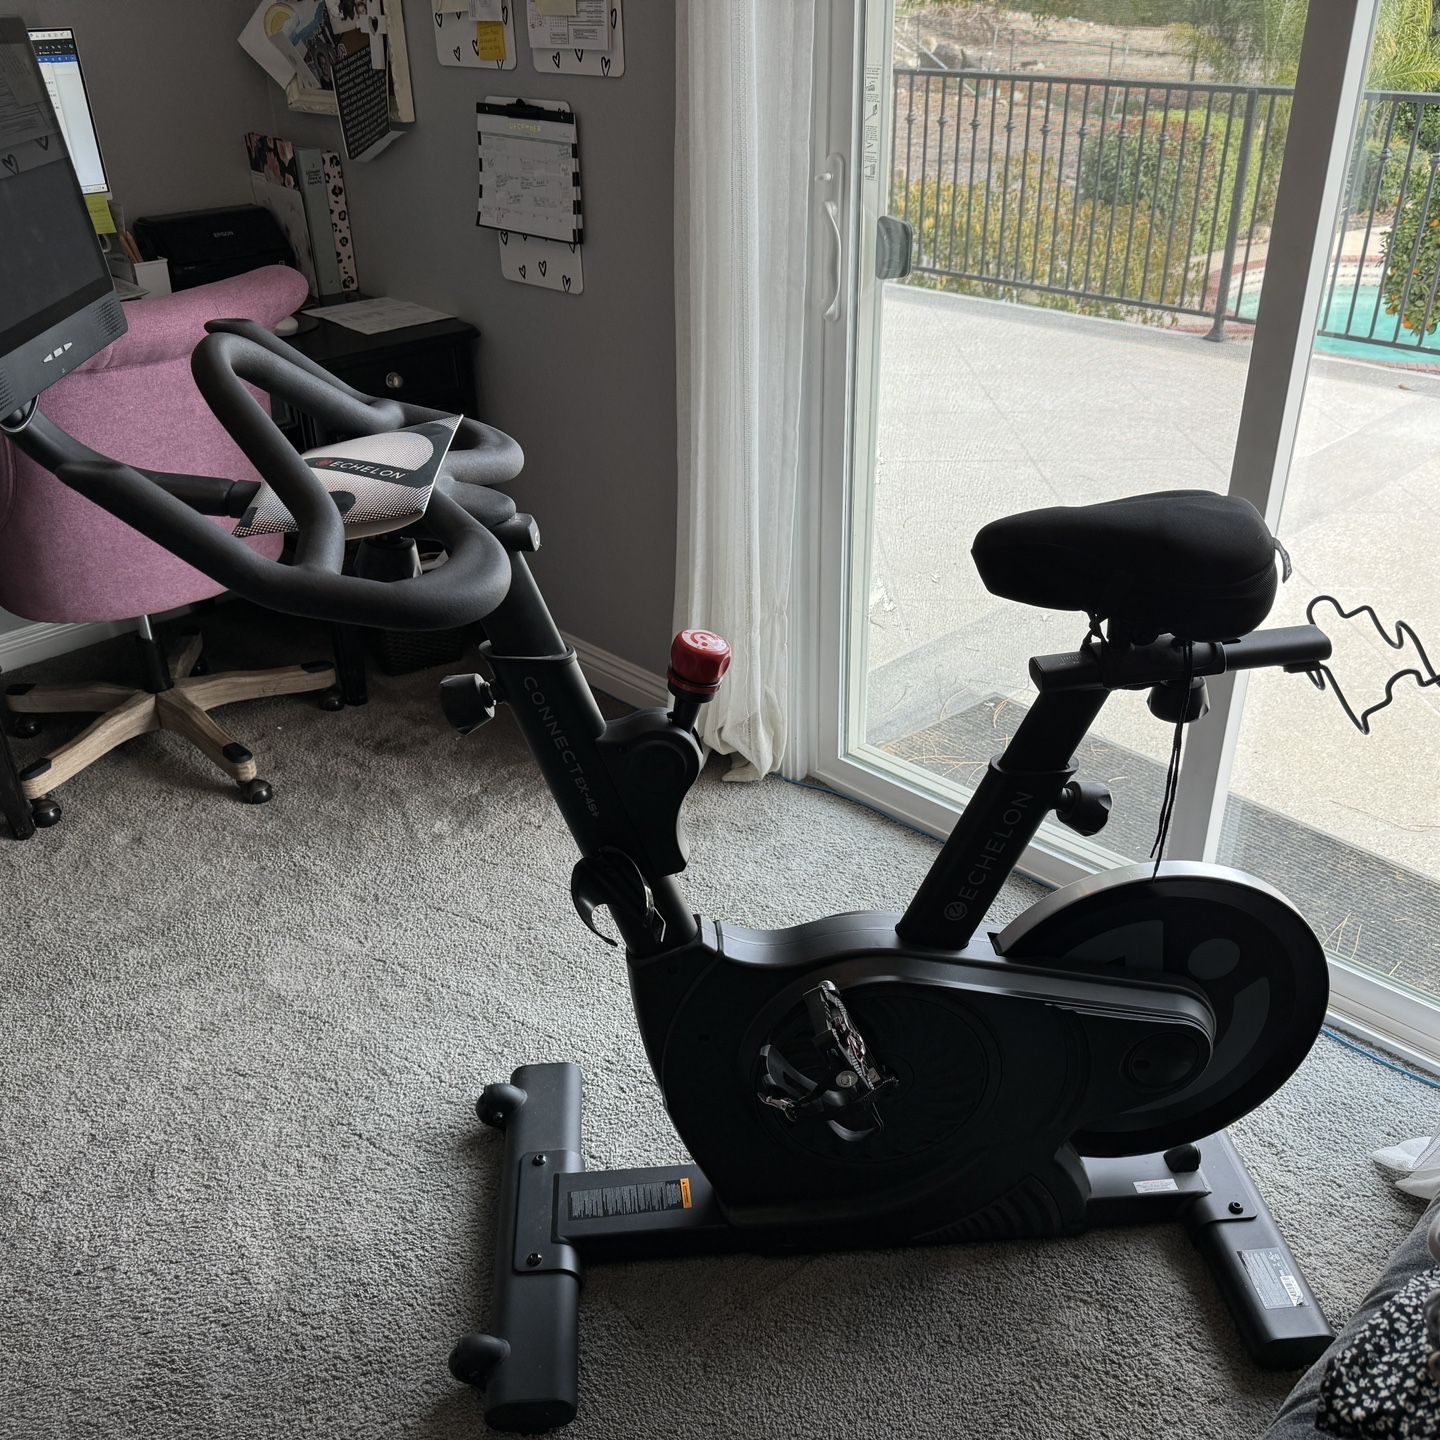 Exercise bike Used 7 Times 